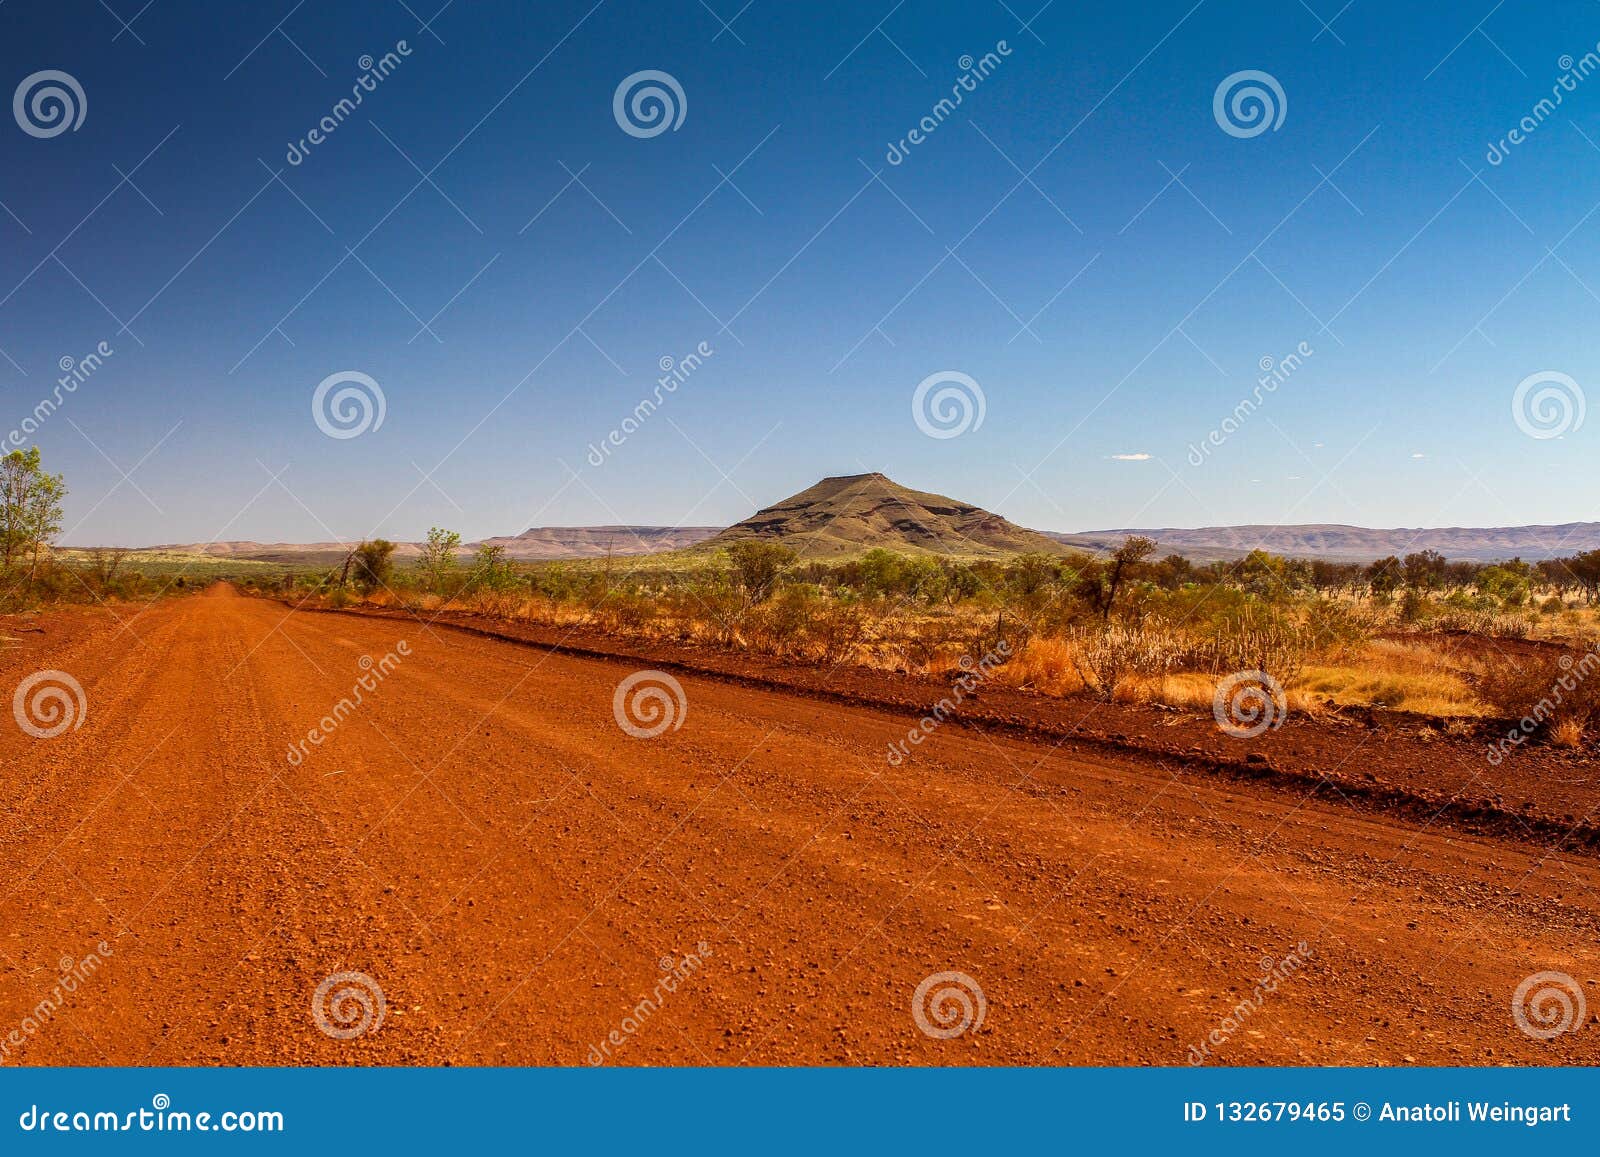 red outback road in australia